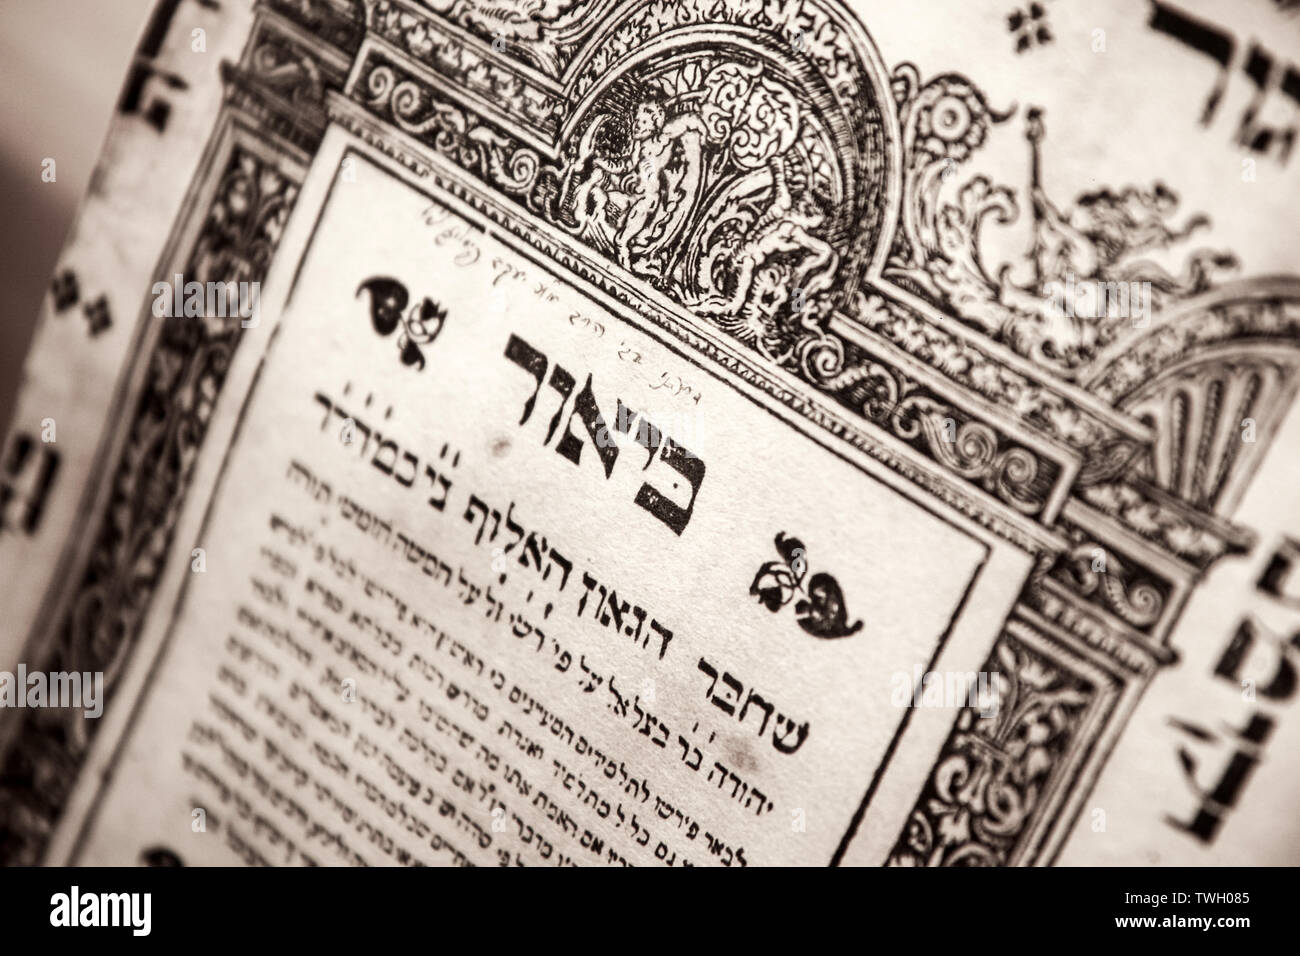 A detail of the text of an old jewish document. A page from the hebrew book. Stock Photo